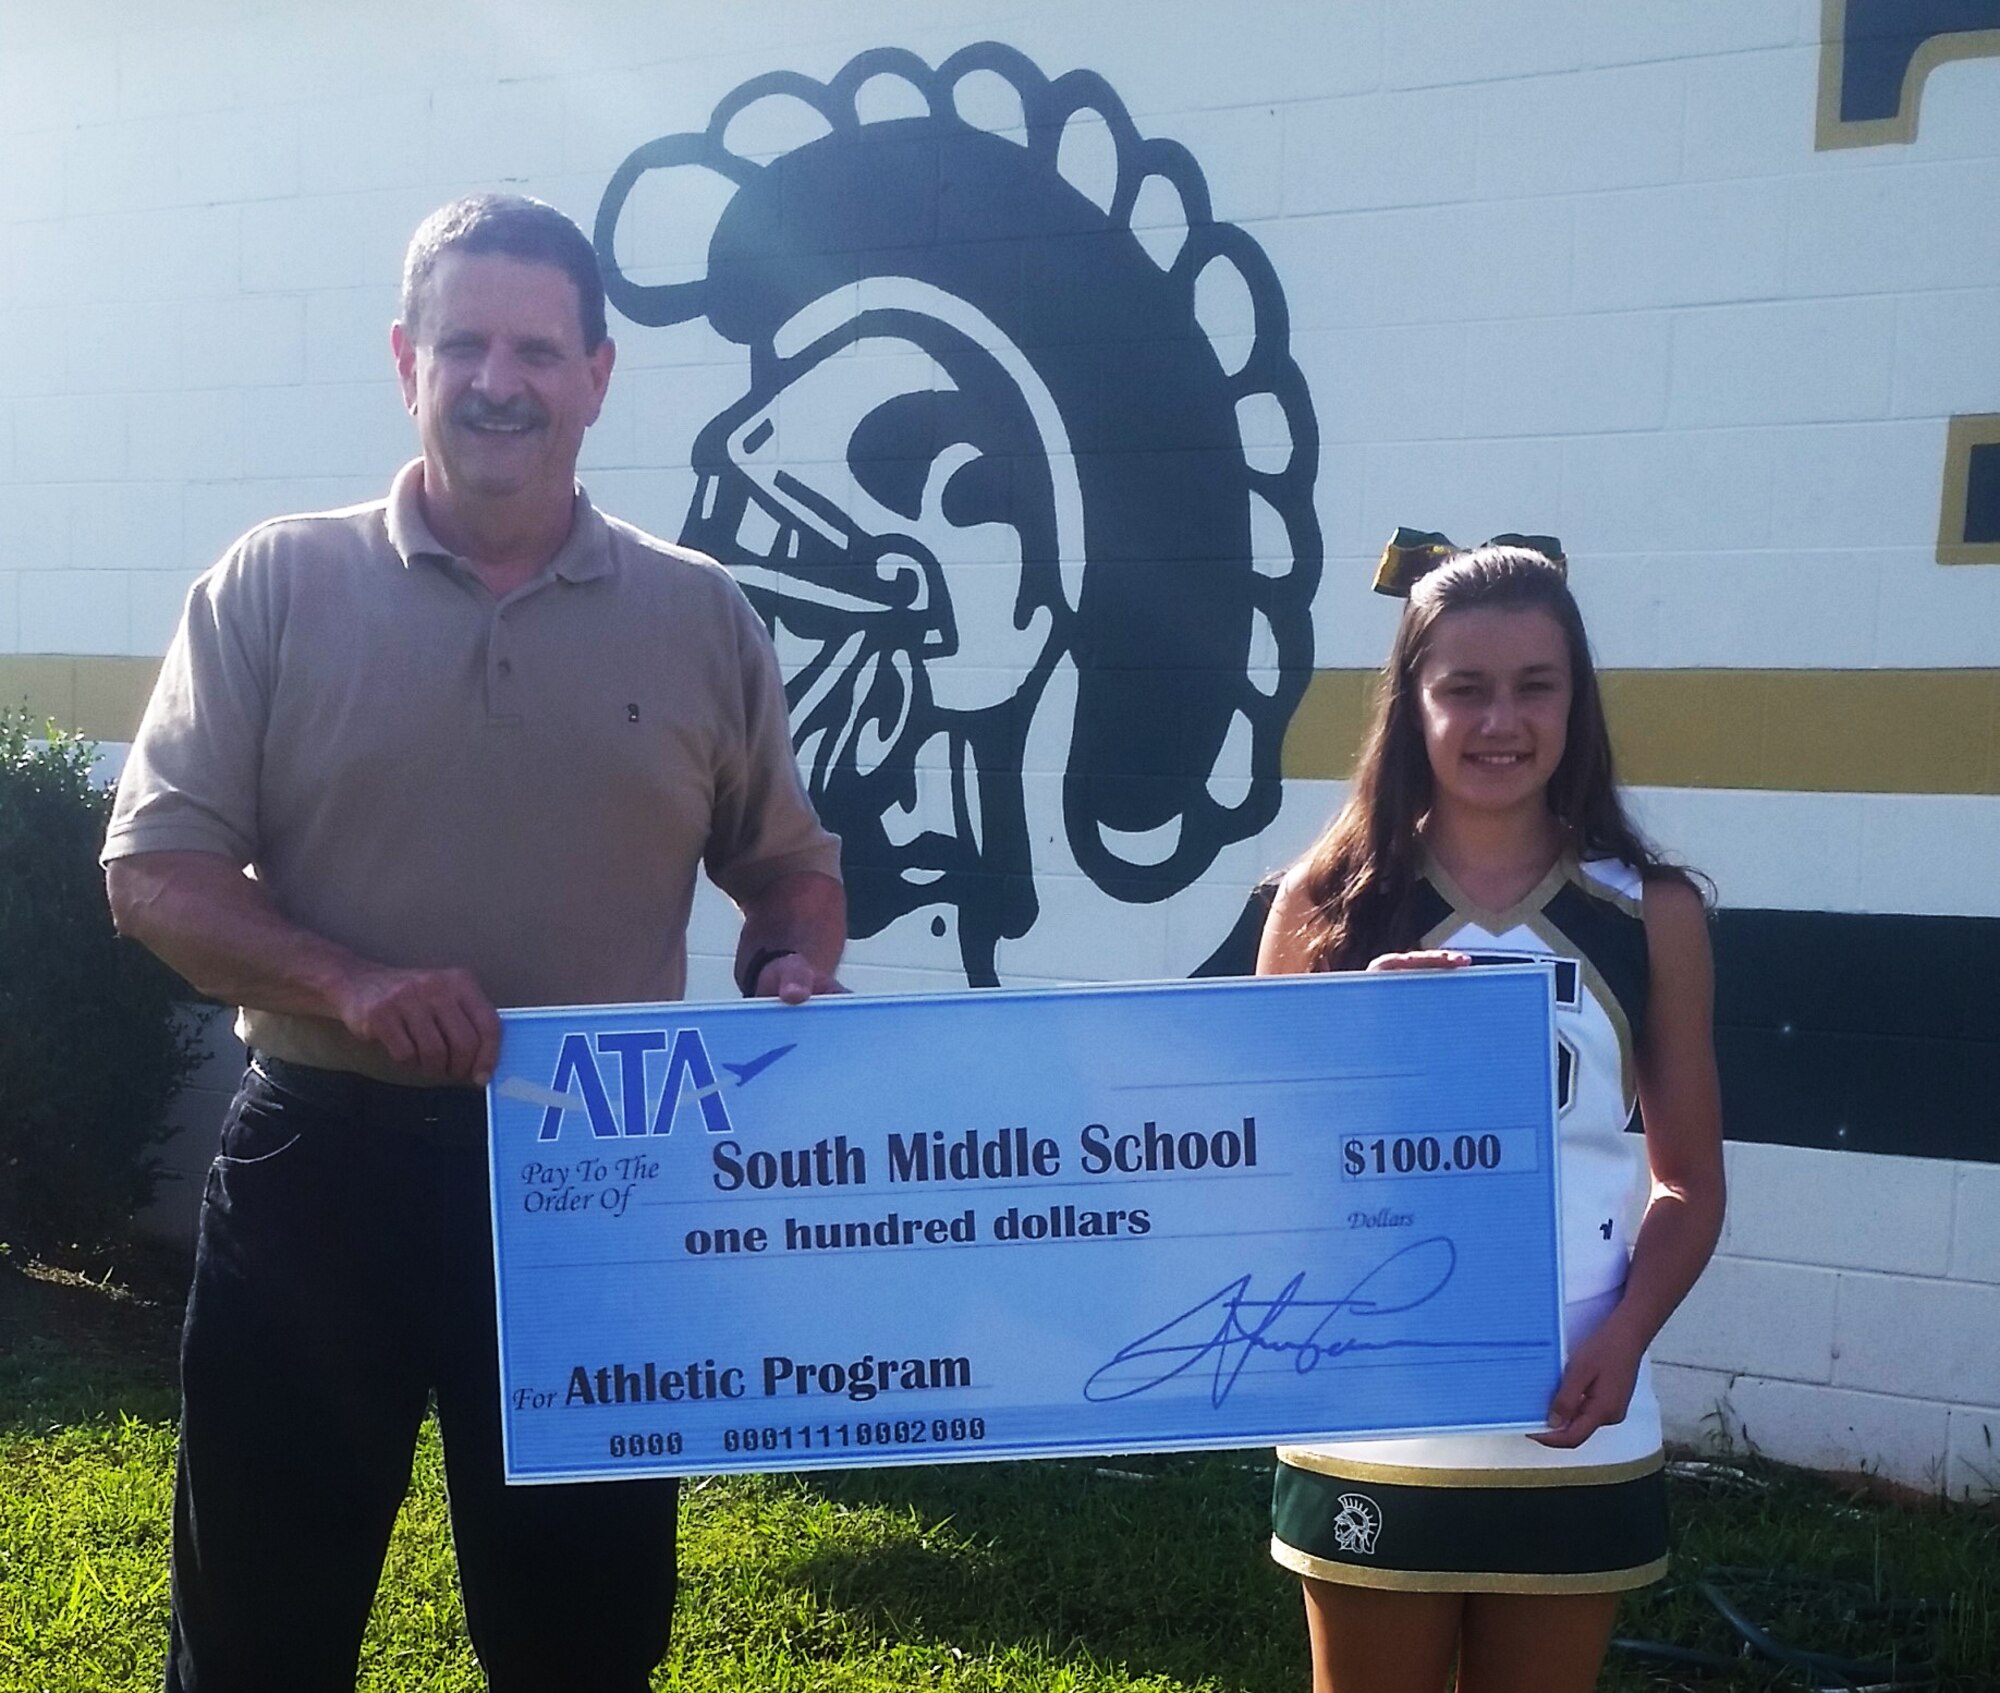 ATA Employee and Community Activities Committee member Ted Boswell presents a $100 ATA donation to Amelia Myers for the South Middle School Athletic Program. The E&CAC is responsible for making ATA donations to charitable organizations in the area surrounding Arnold Air Force Base. (Photo provided)